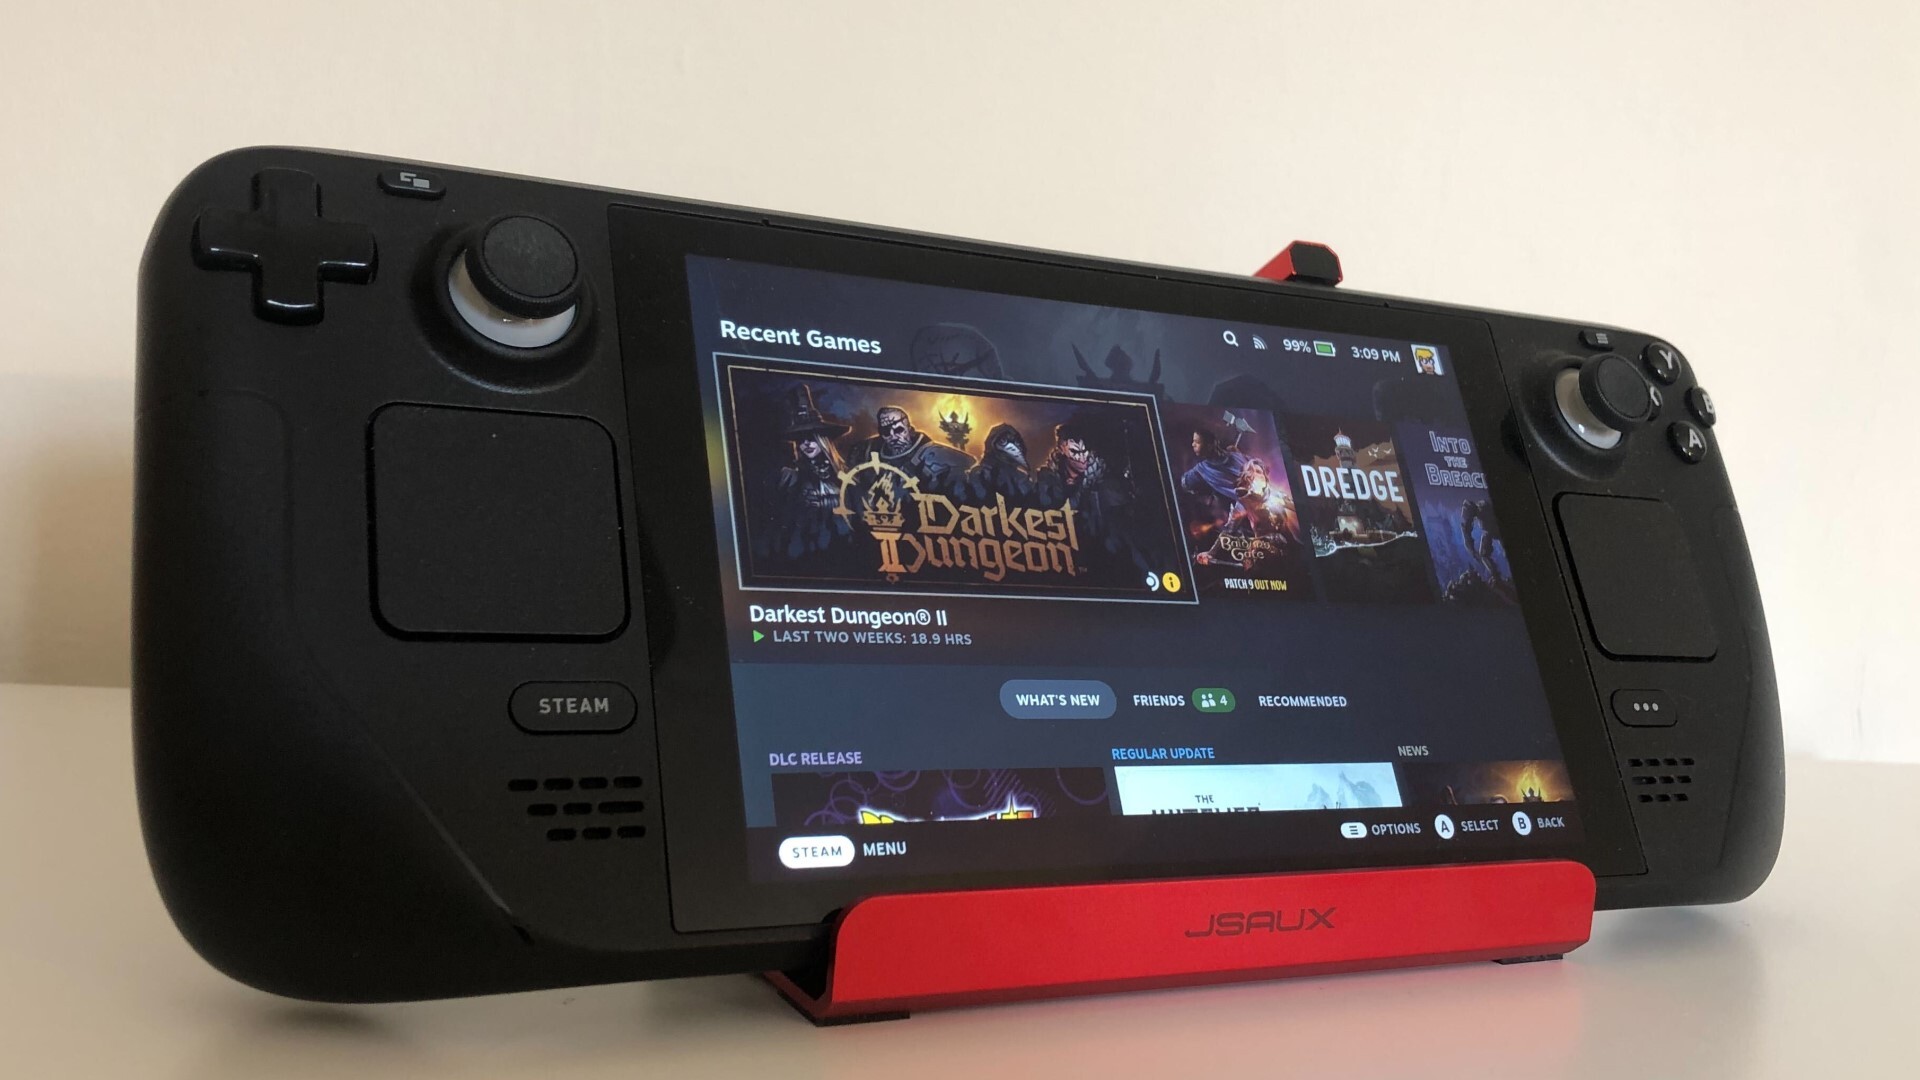 JSAUX USB 6-in-1 Steam Deck Dock with a Steam Deck on it, displaying the Steam page for Darkest Dungeon